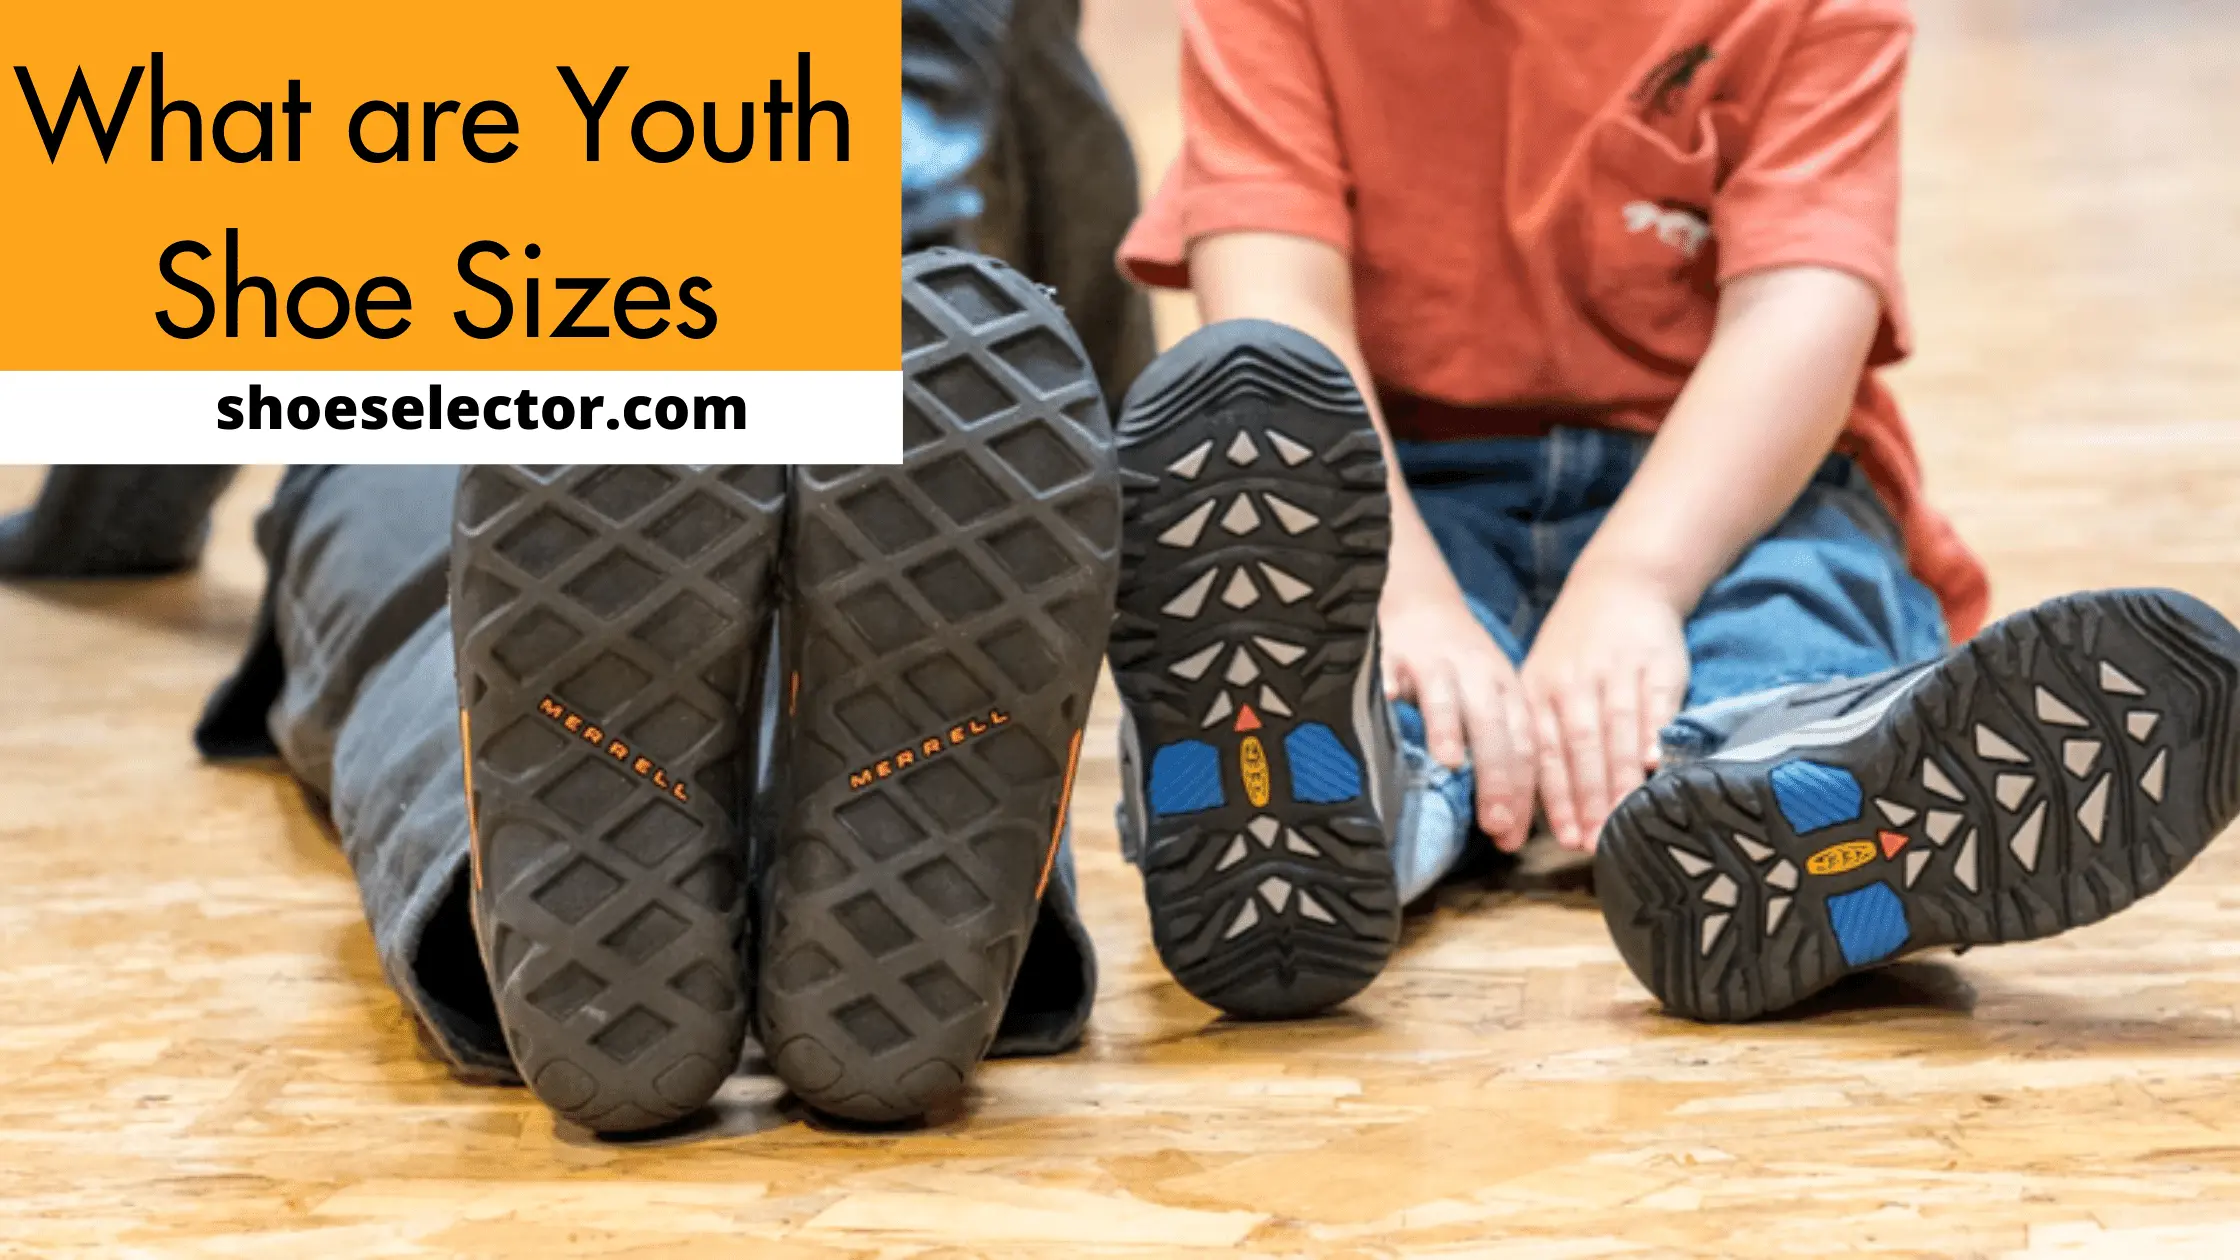 What are Youth Shoe Sizes?